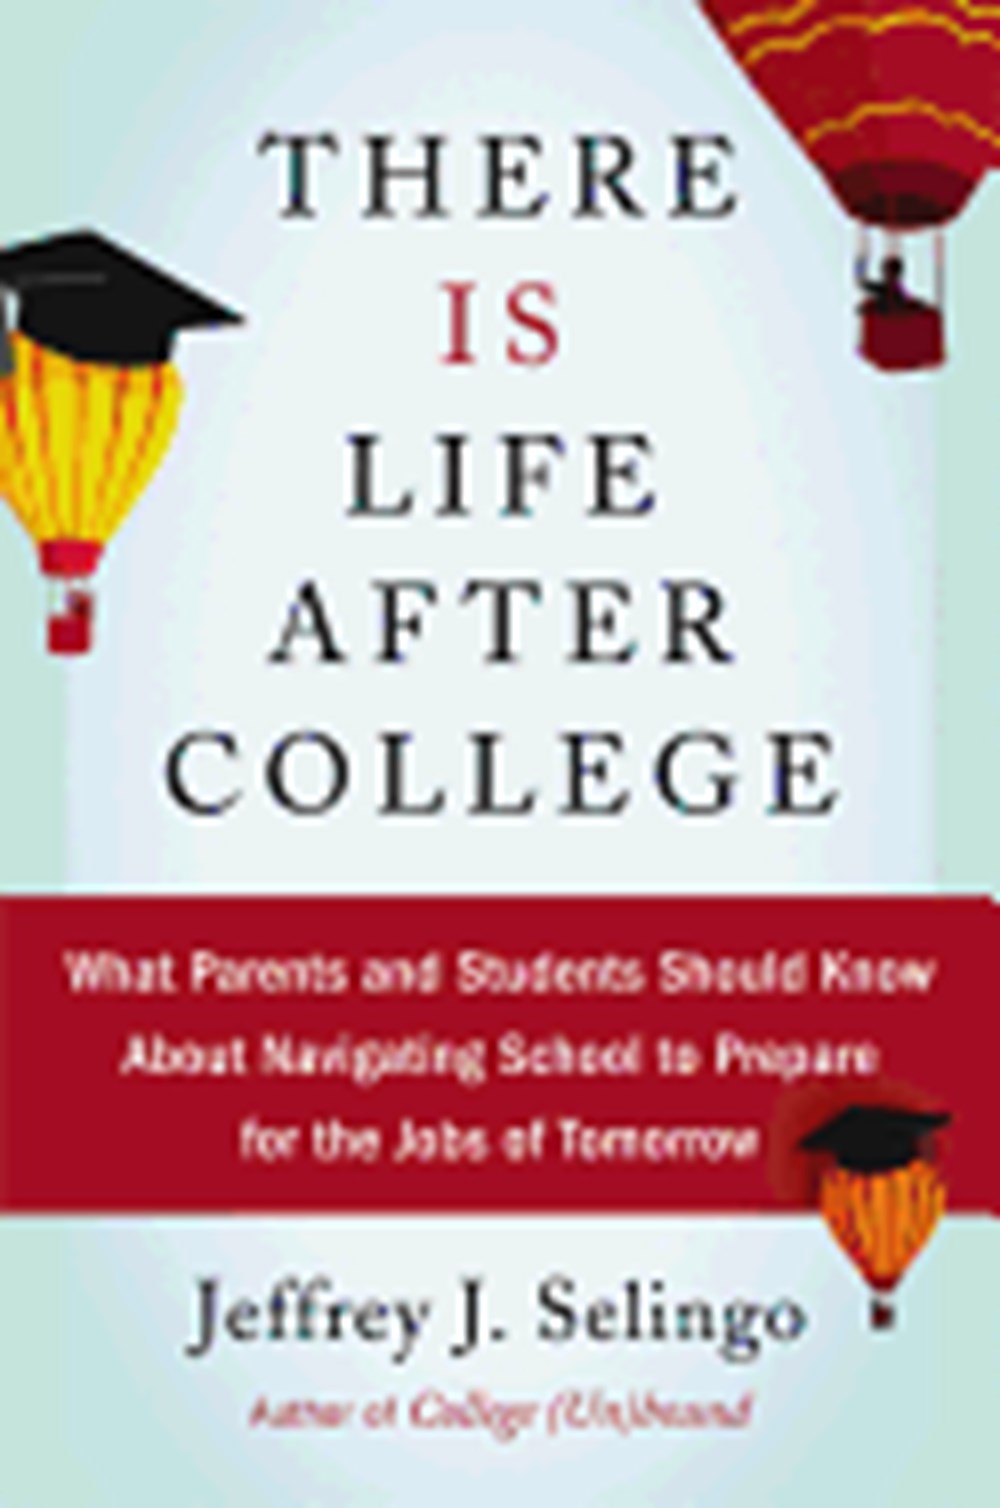 There Is Life After College What Parents and Students Should Know about Navigating School to Prepare